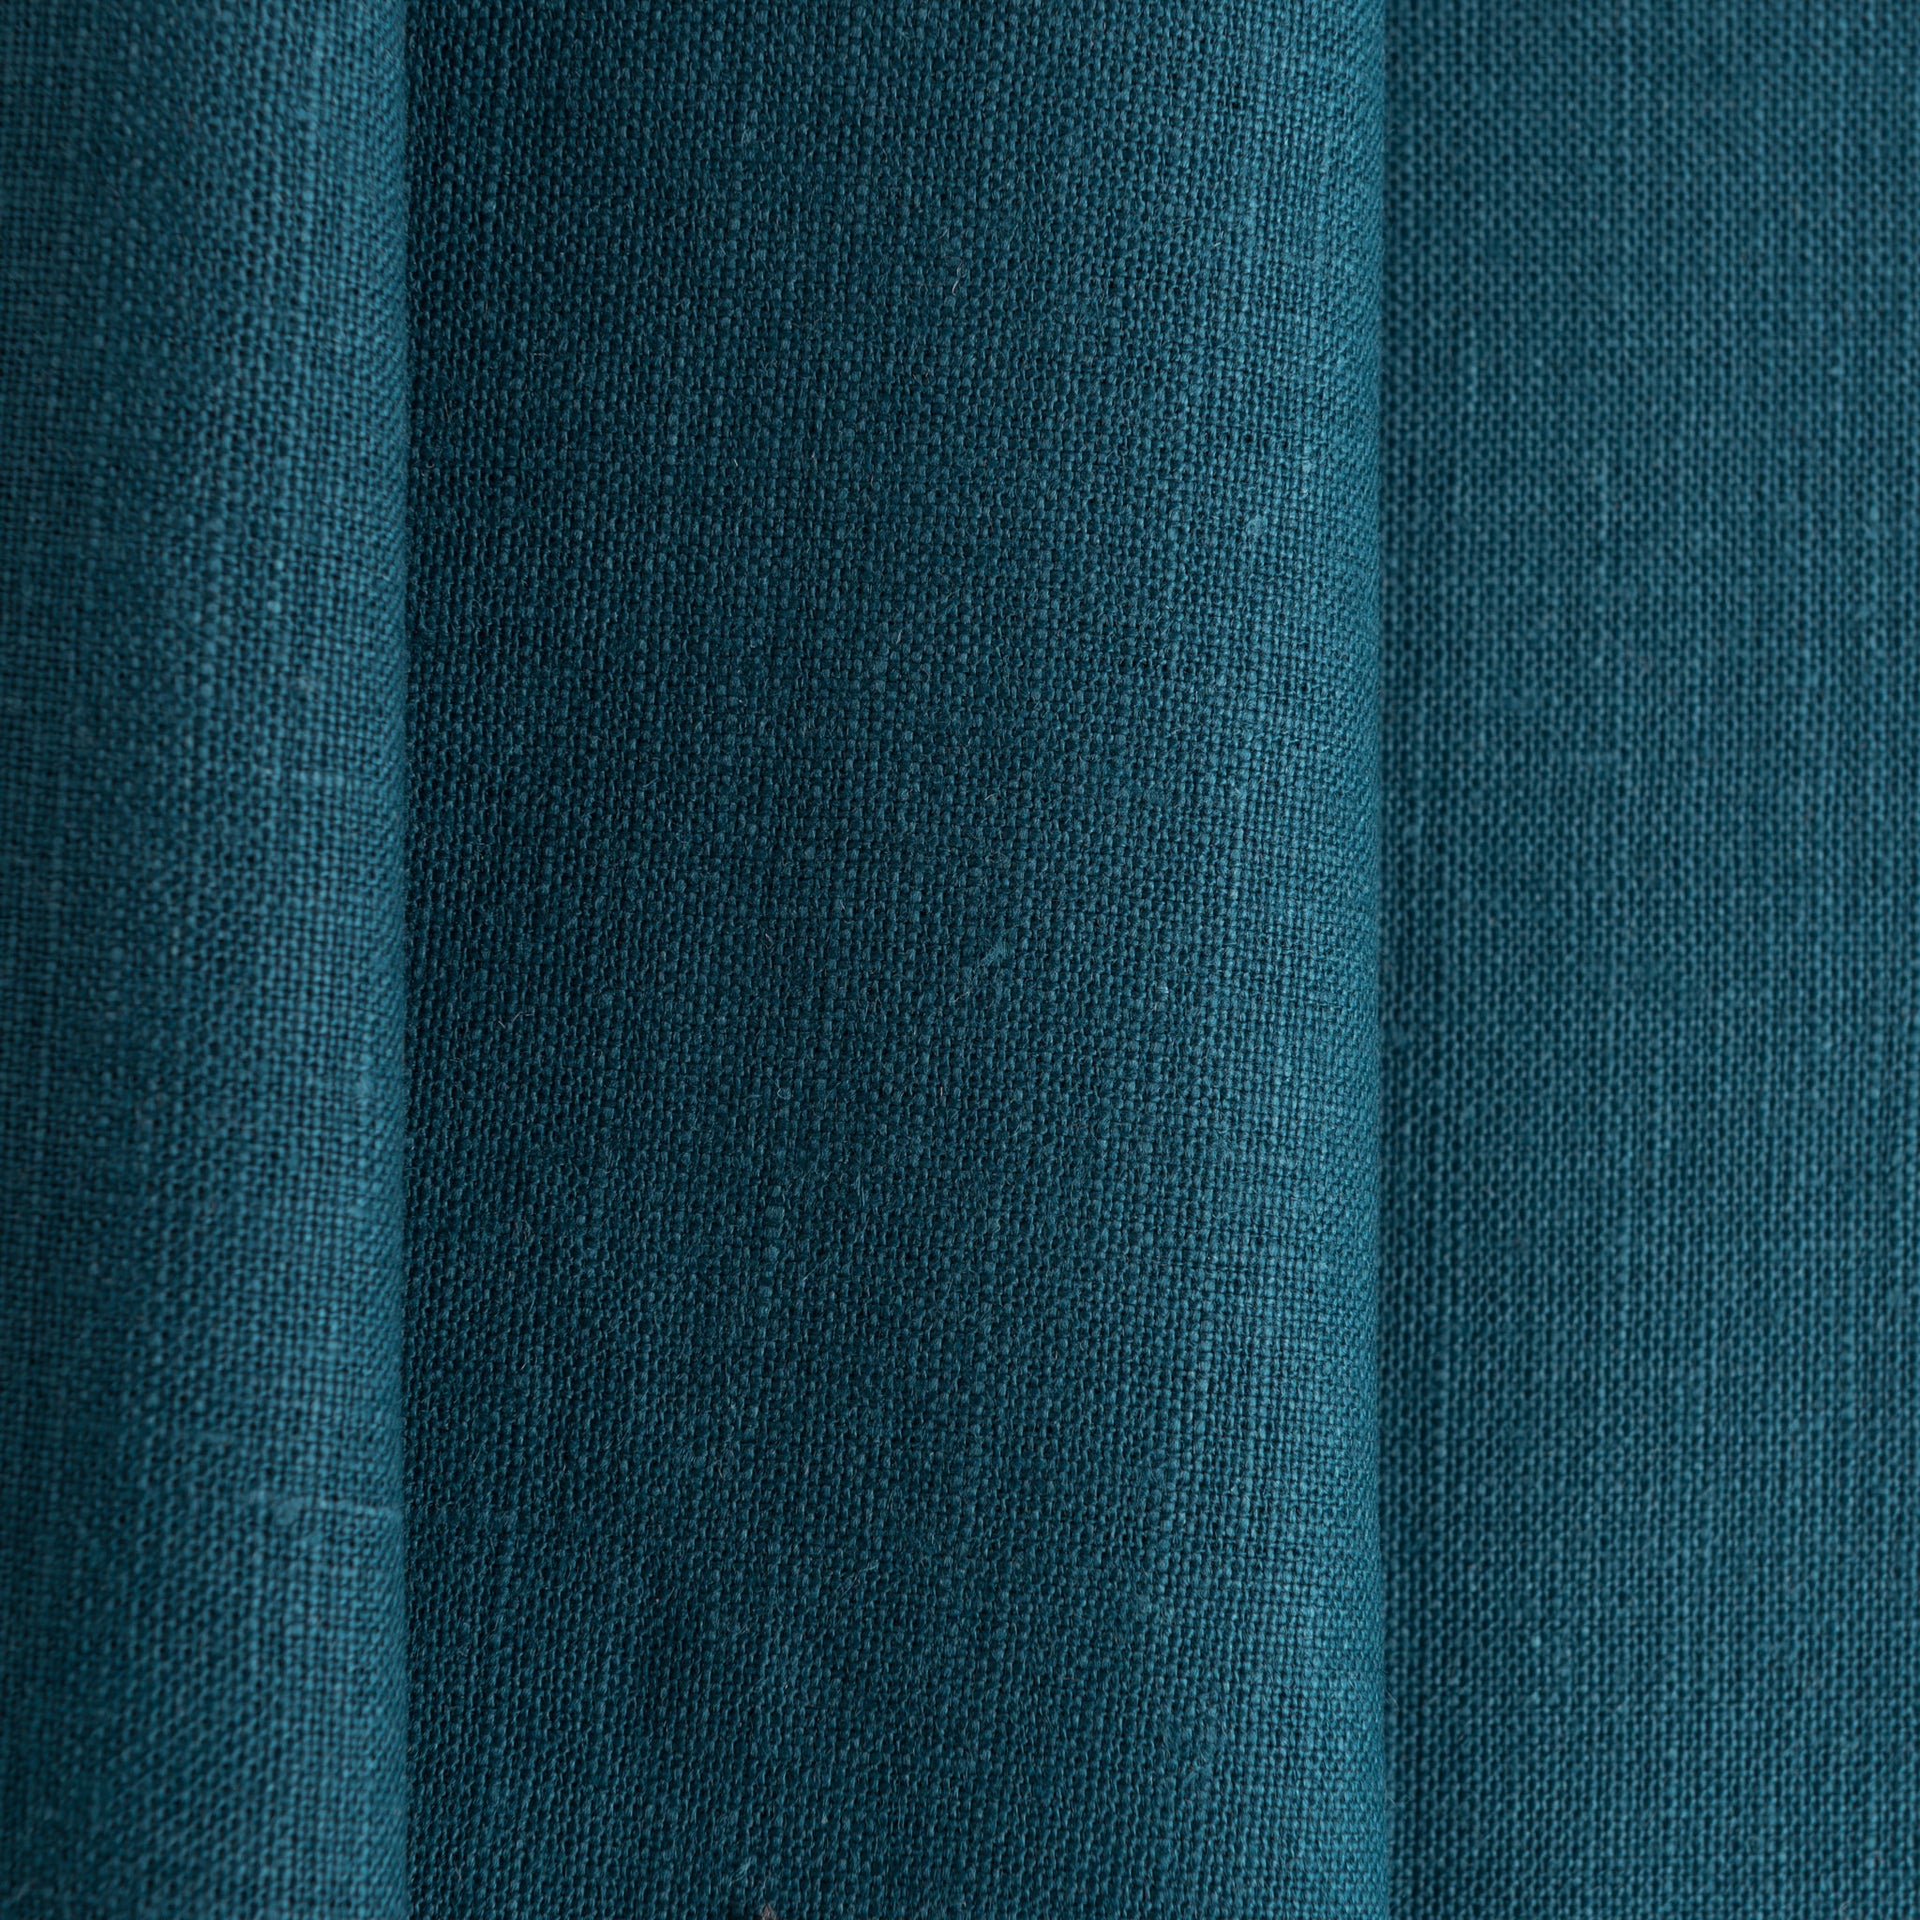 Peacock Blue Linen Fabric by the Meter - 100% French Natural - Width 133 cm, 267 cm